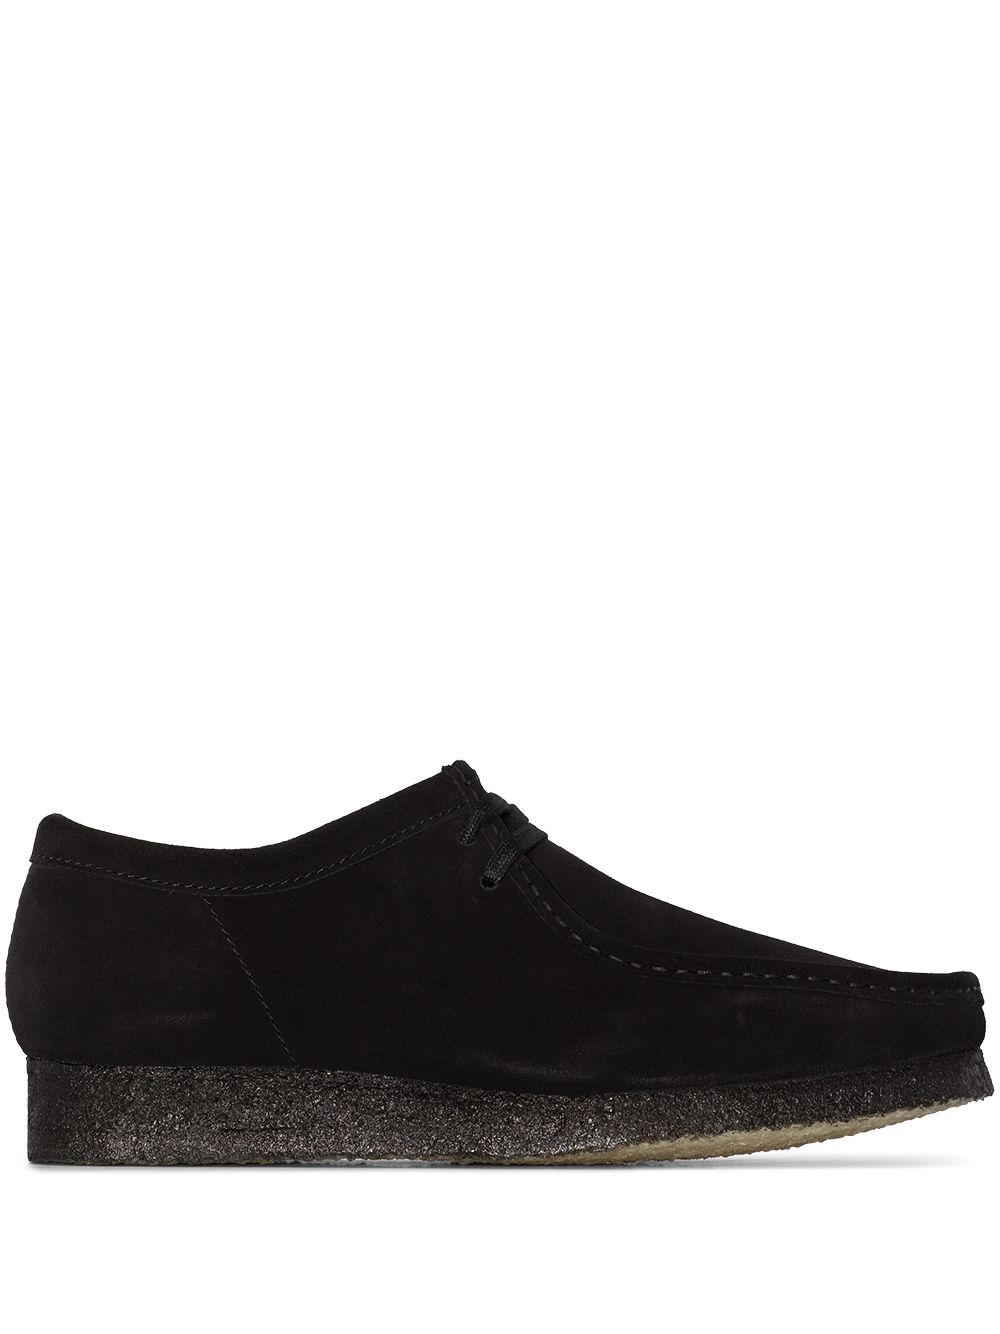 Shop Clarks Originals Wallabee Lace-up Shoes In Black